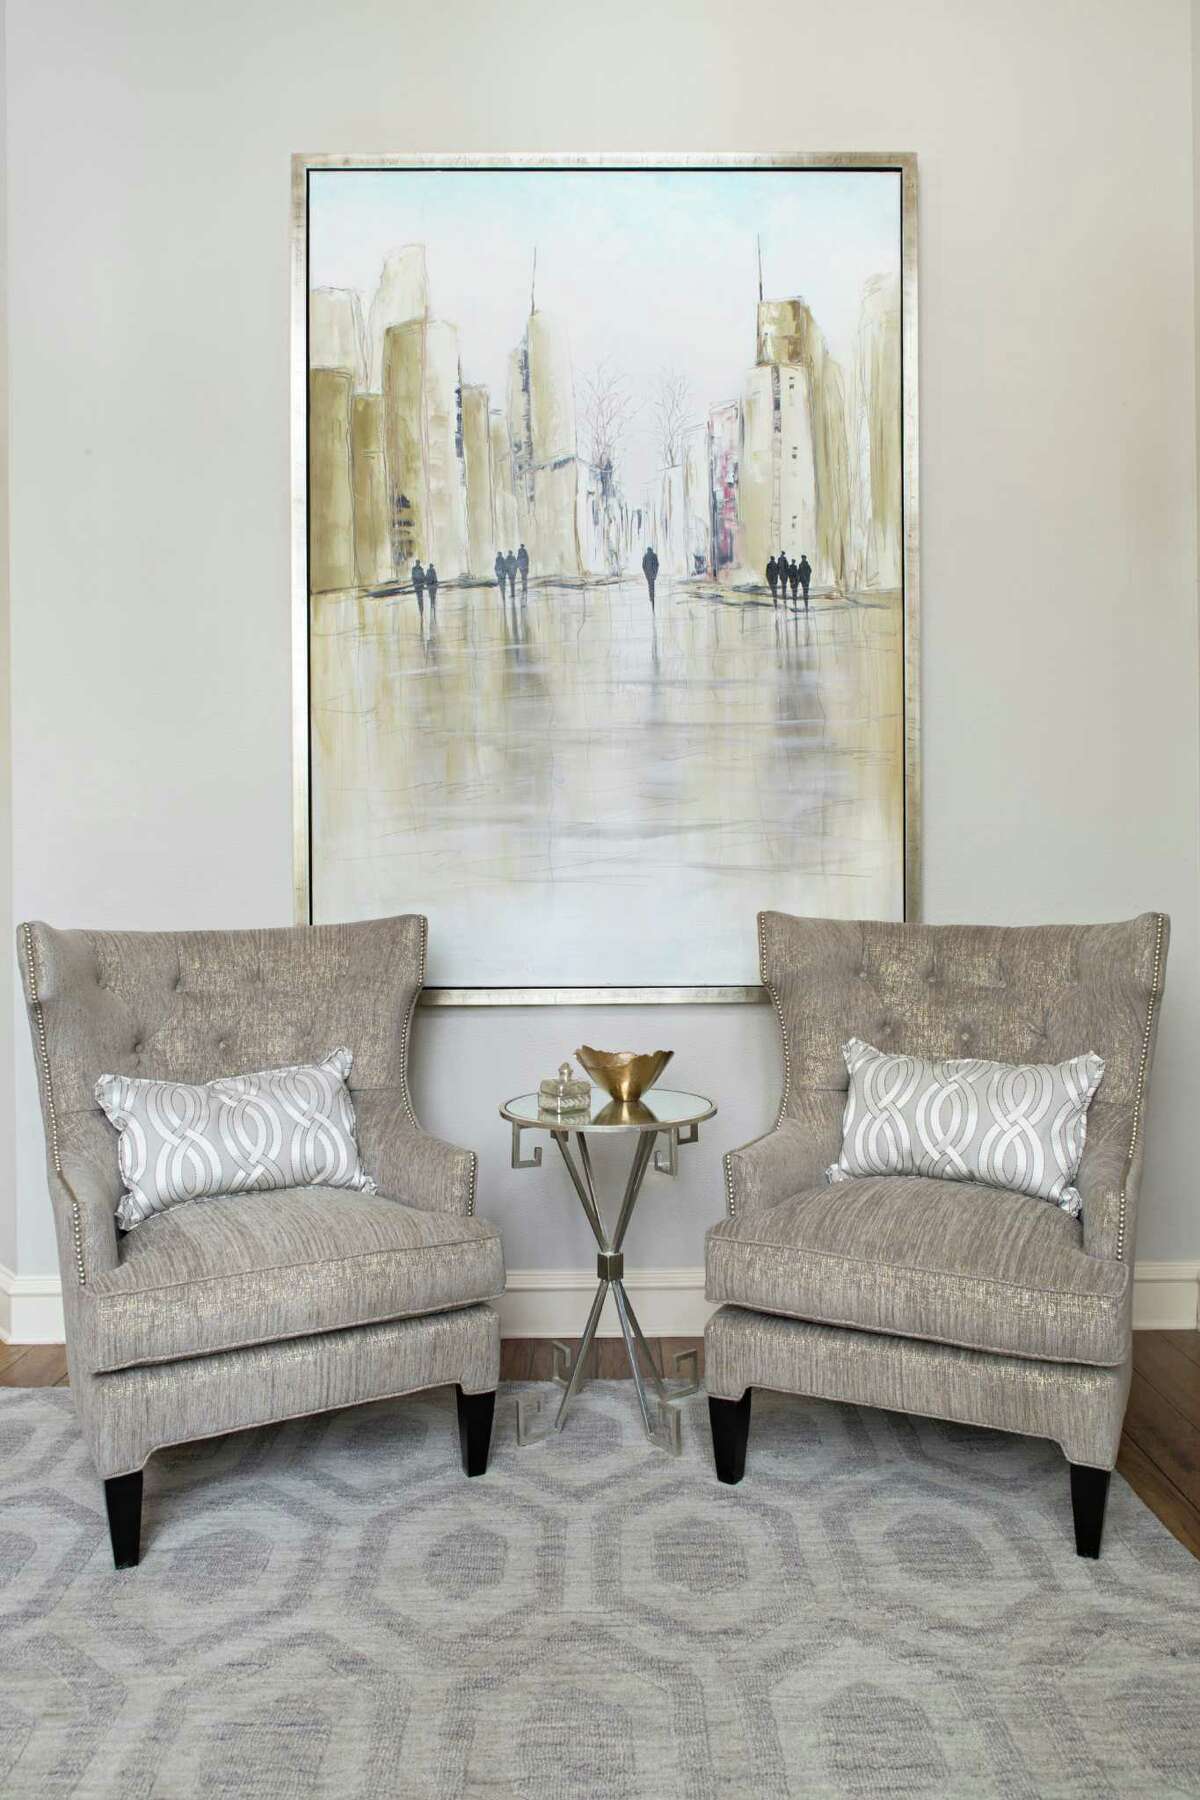 Behind the armchairs hangs a large painting Eck found in Dallas. The Liljas love New York City - it's where Jennifer was born - and they wanted to find a city scene that wouldn't darken the room.